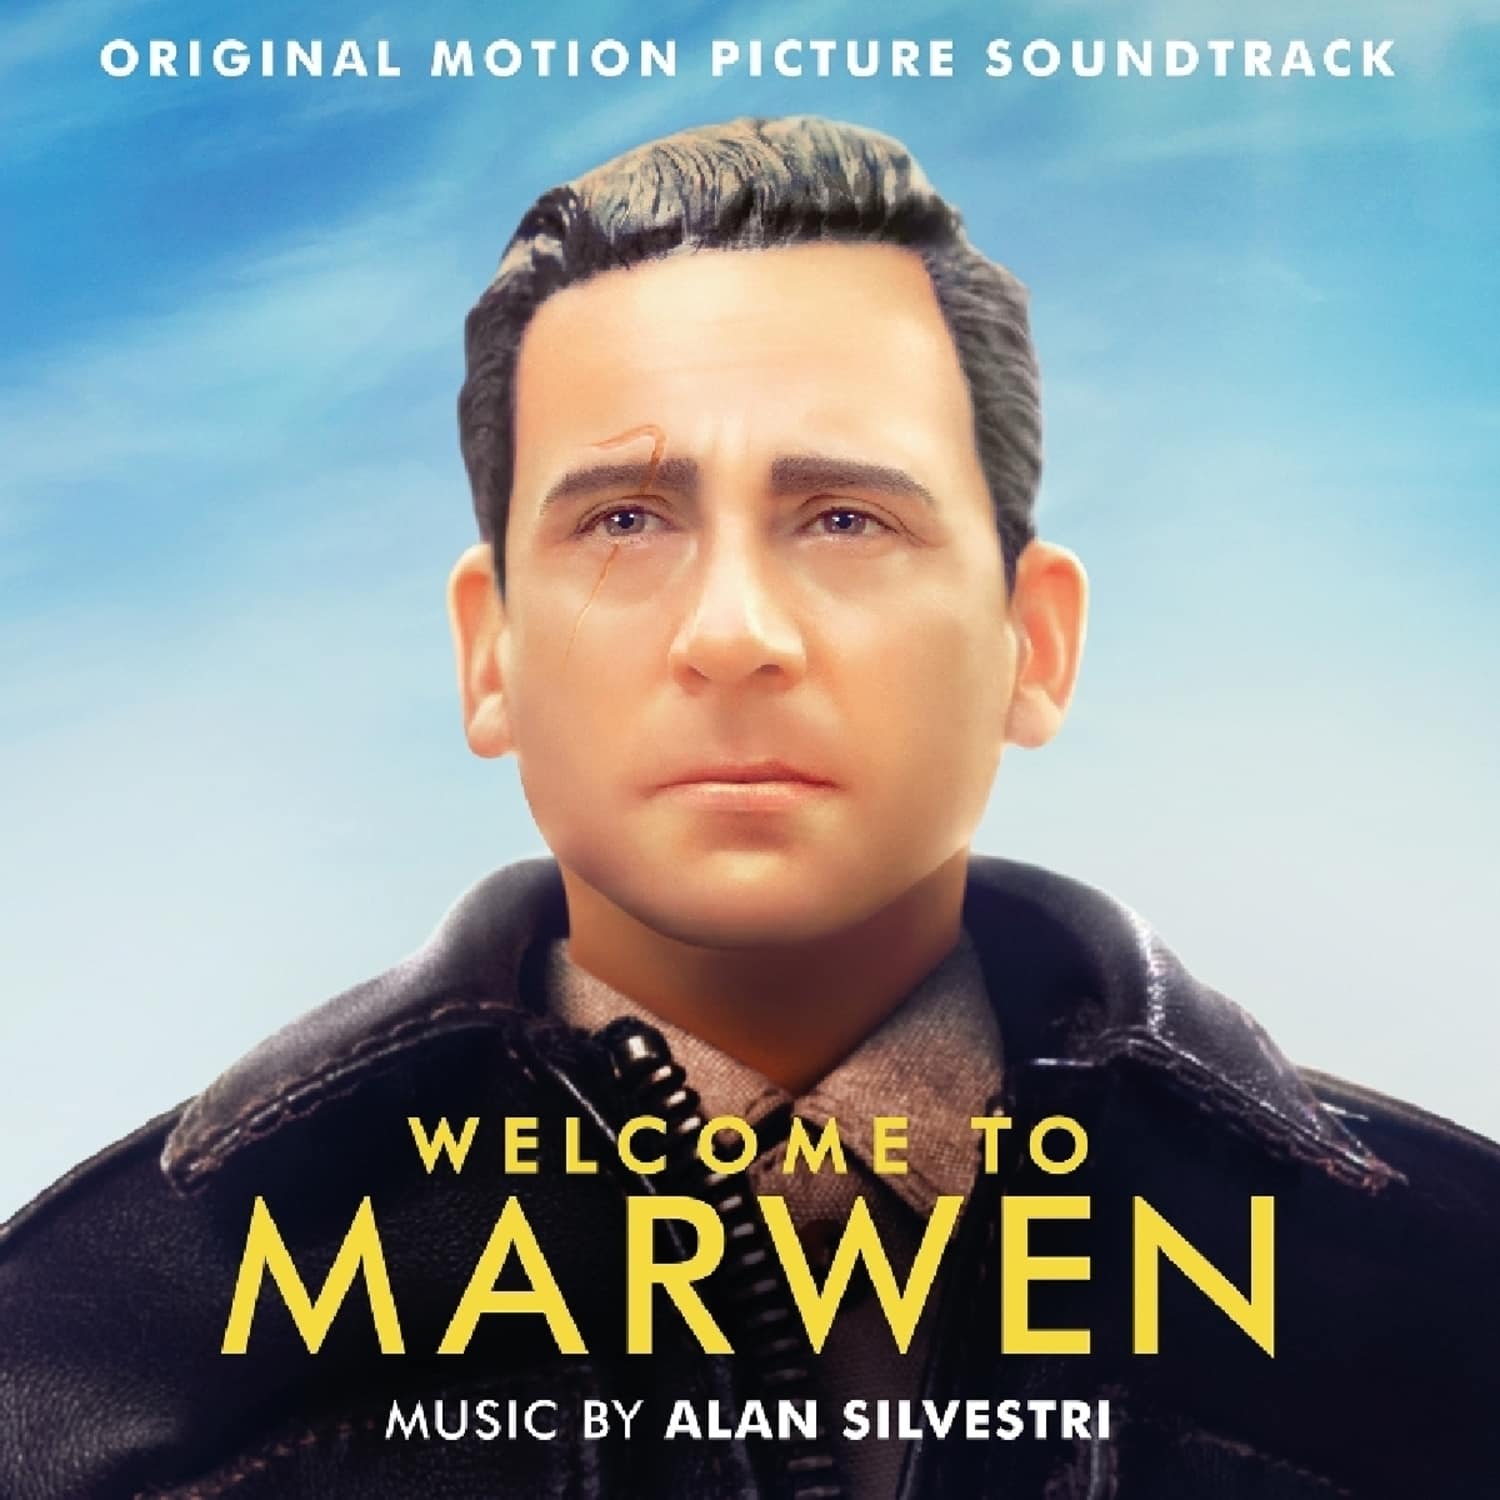 OST/Various / Alan Silvestri - WELCOME TO MARWEN 